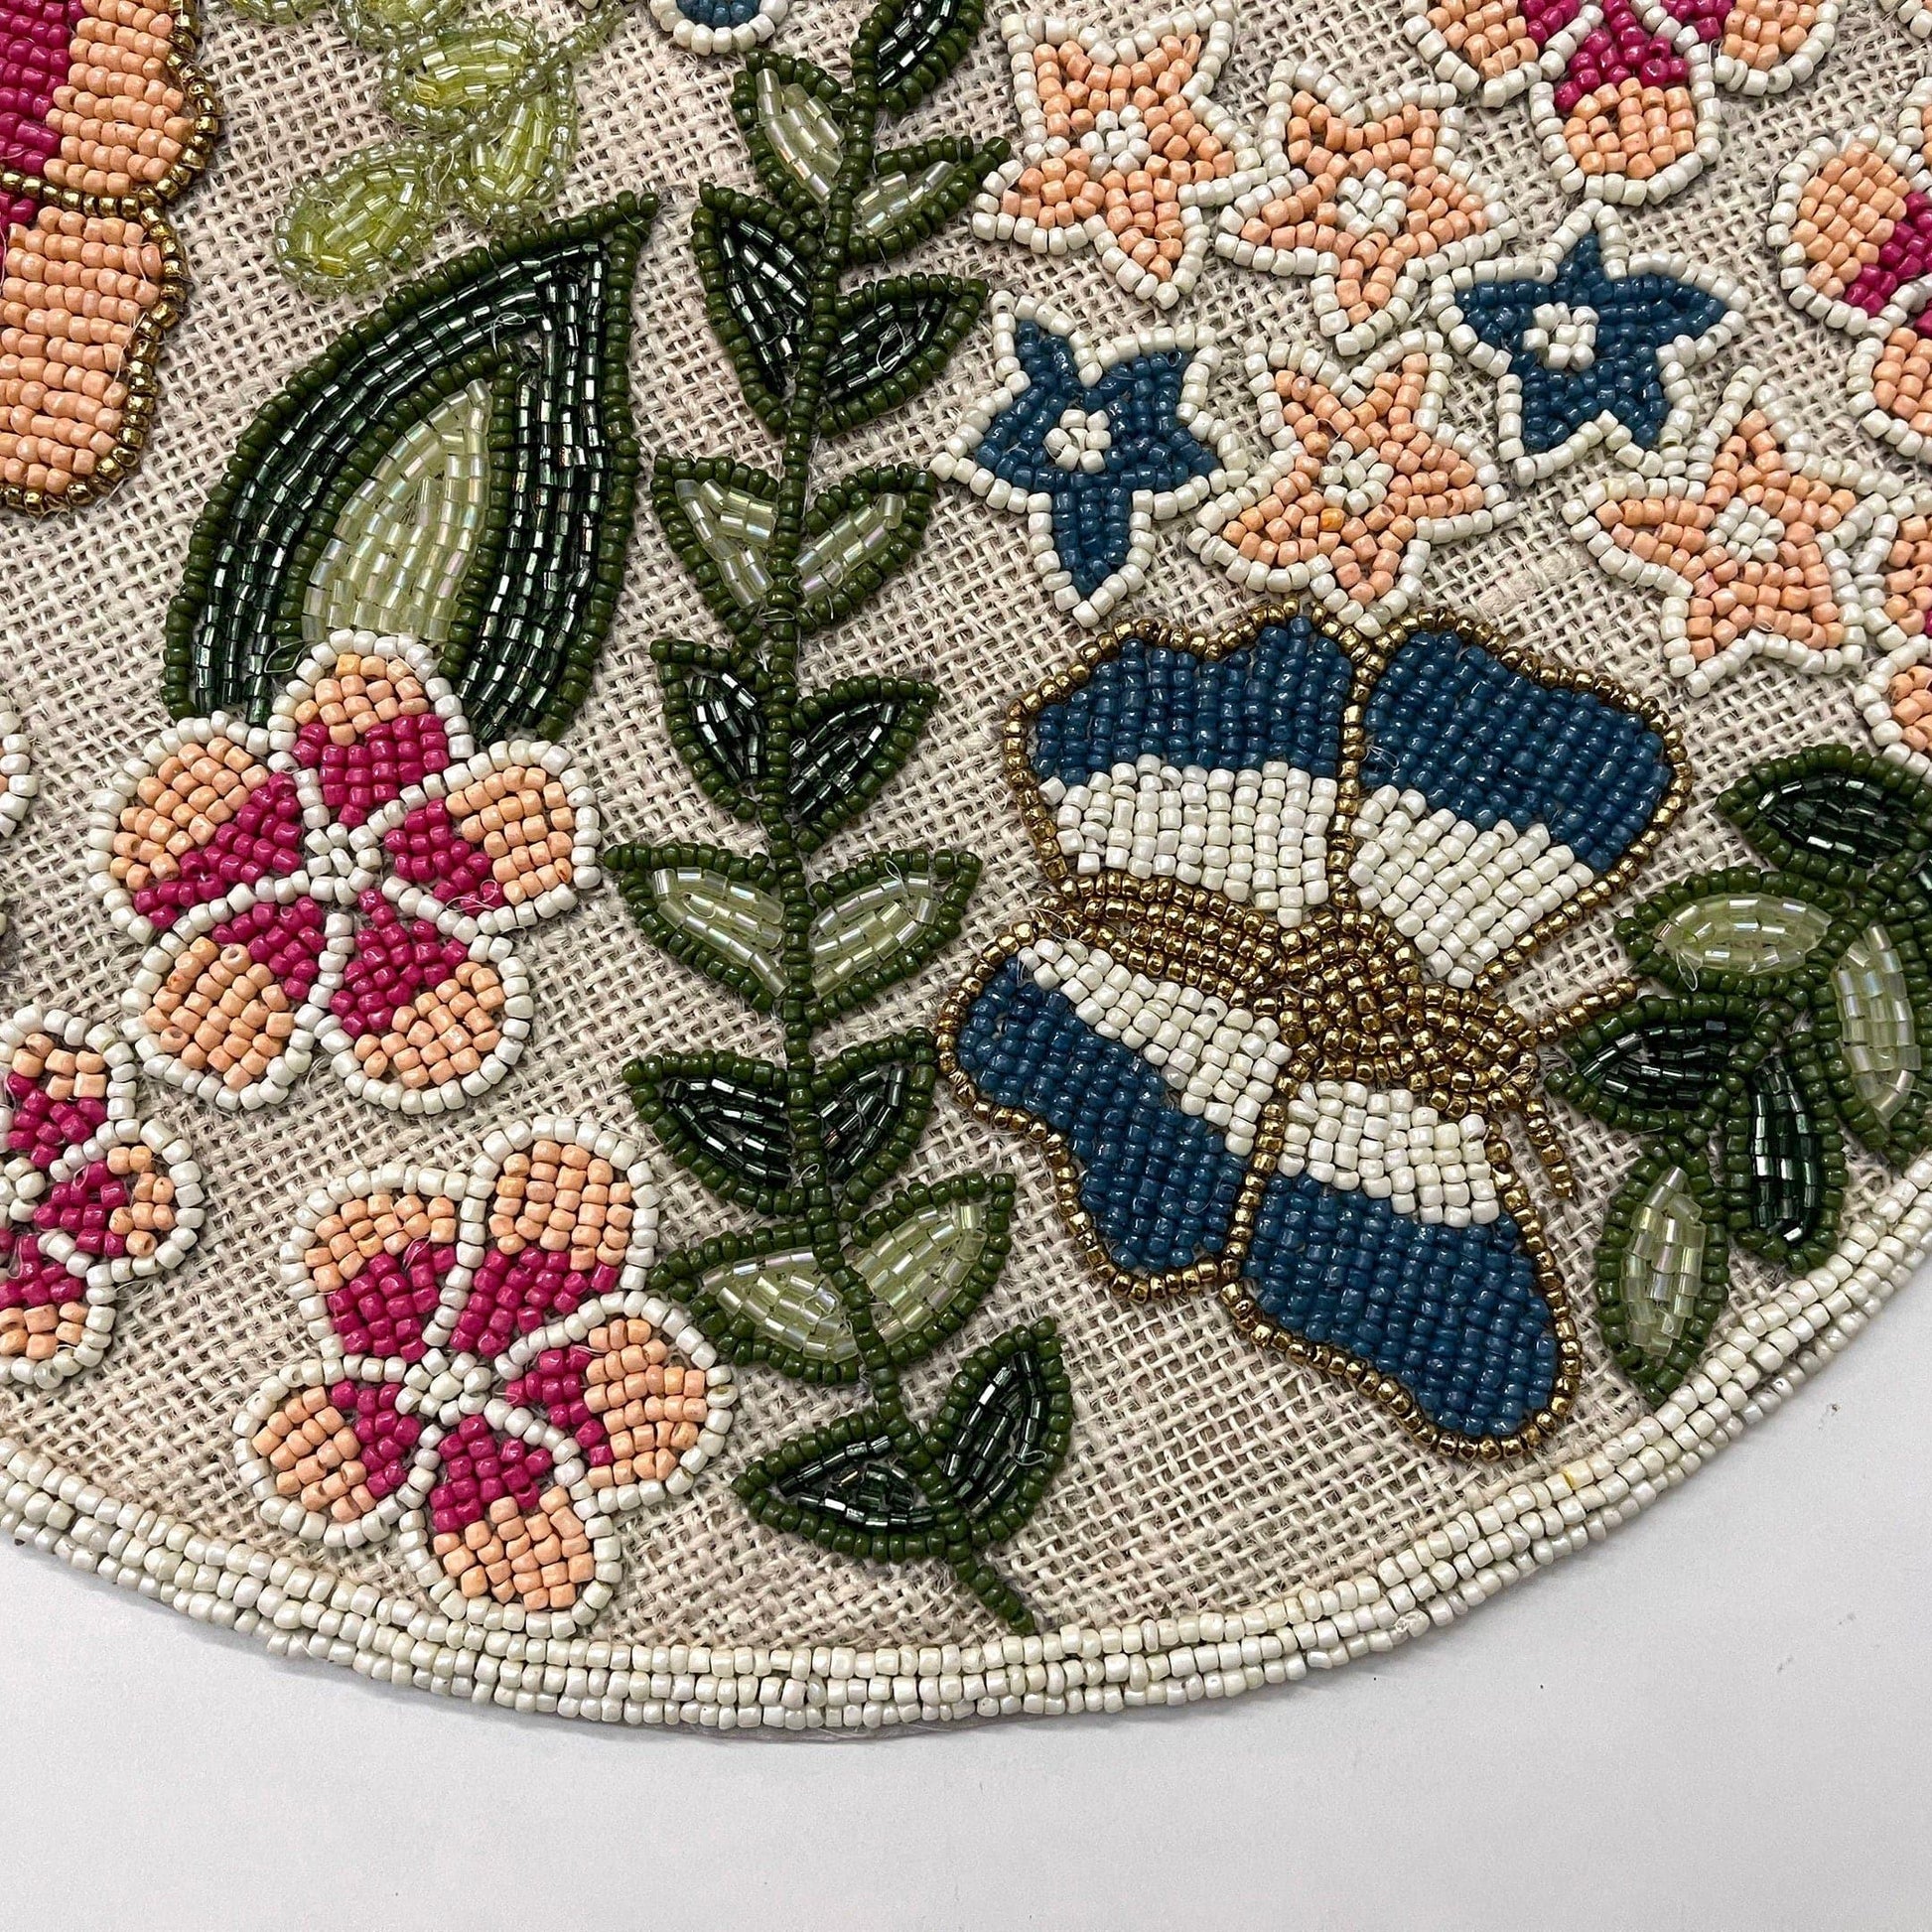 Butterfly and Flower Round Beaded Burlap Placemat - MAIA HOMES